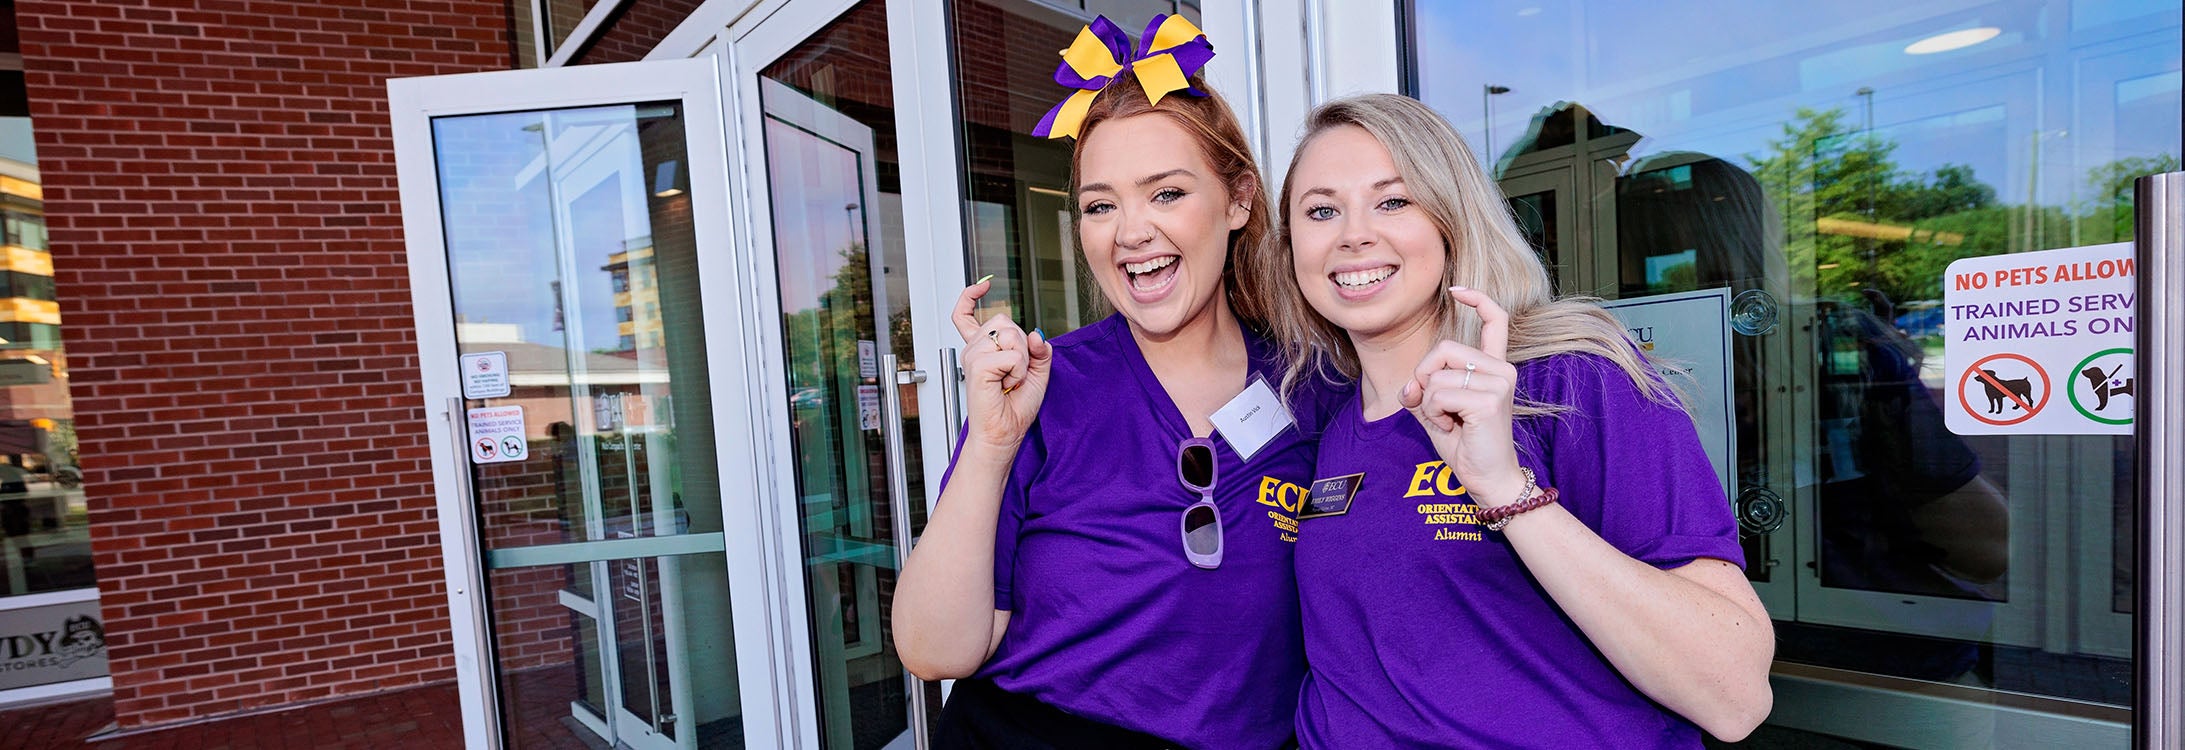 Austin Vick, left, and Emily Wiggins were two of 17 ECU alumni who returned to campus on June 13 to help lead new student orientation sessions.